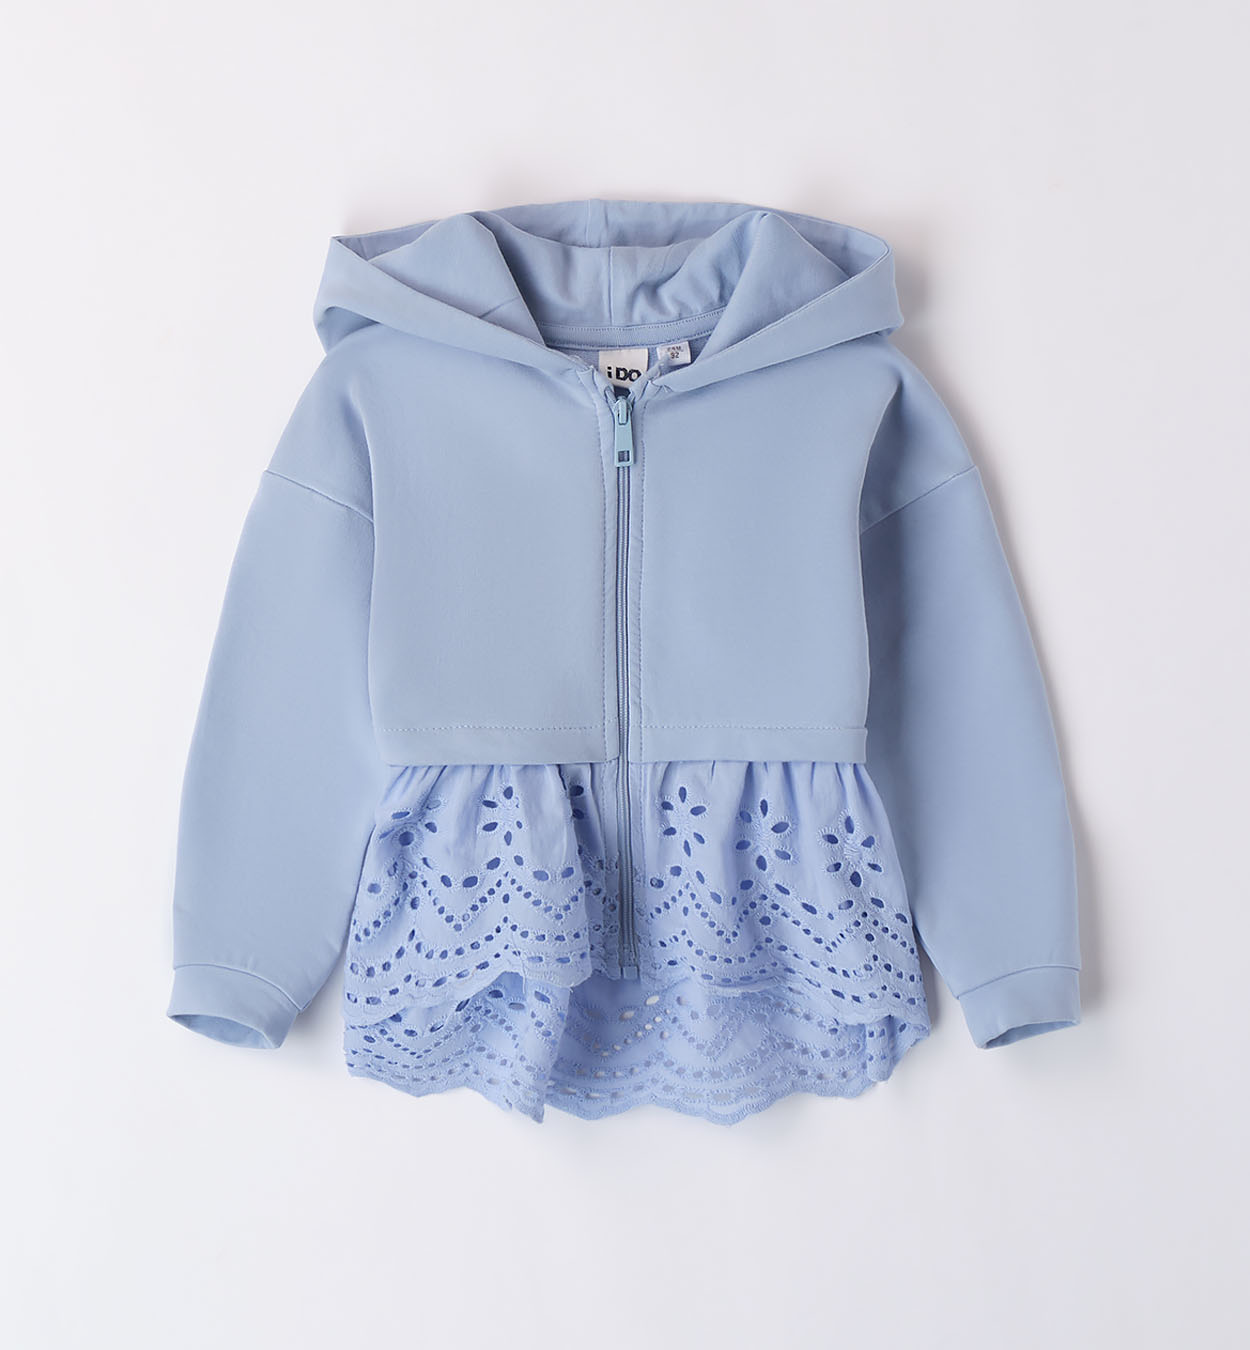 Light sweatshirt with broderie anglaise